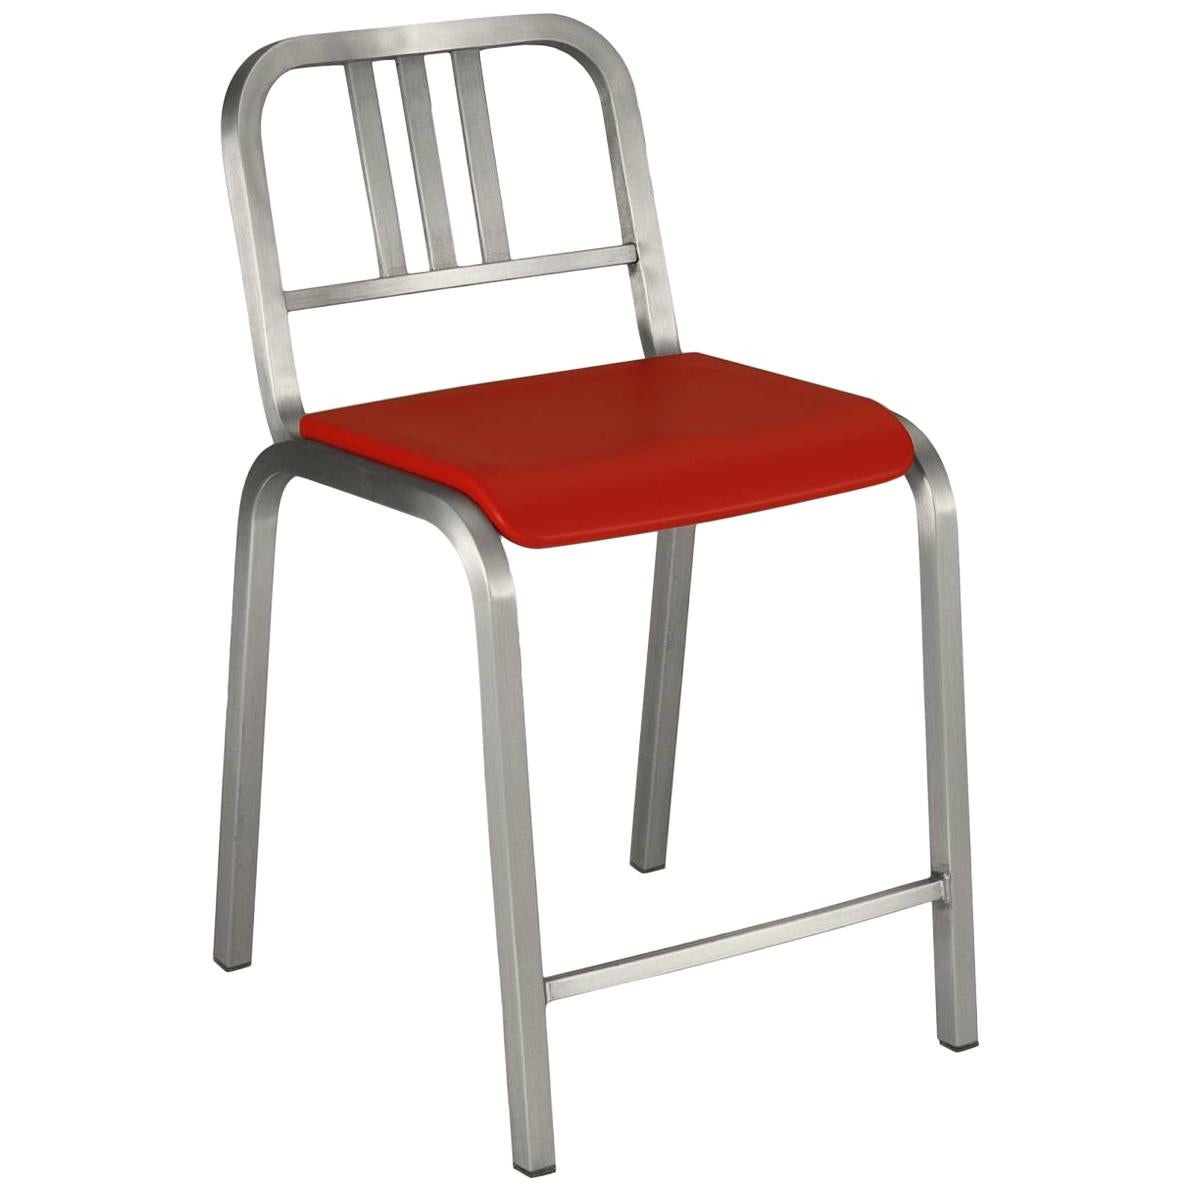 Emeco Nine-0 Counter Stool in Brushed Aluminum with Red Seat by Ettore Sottsass